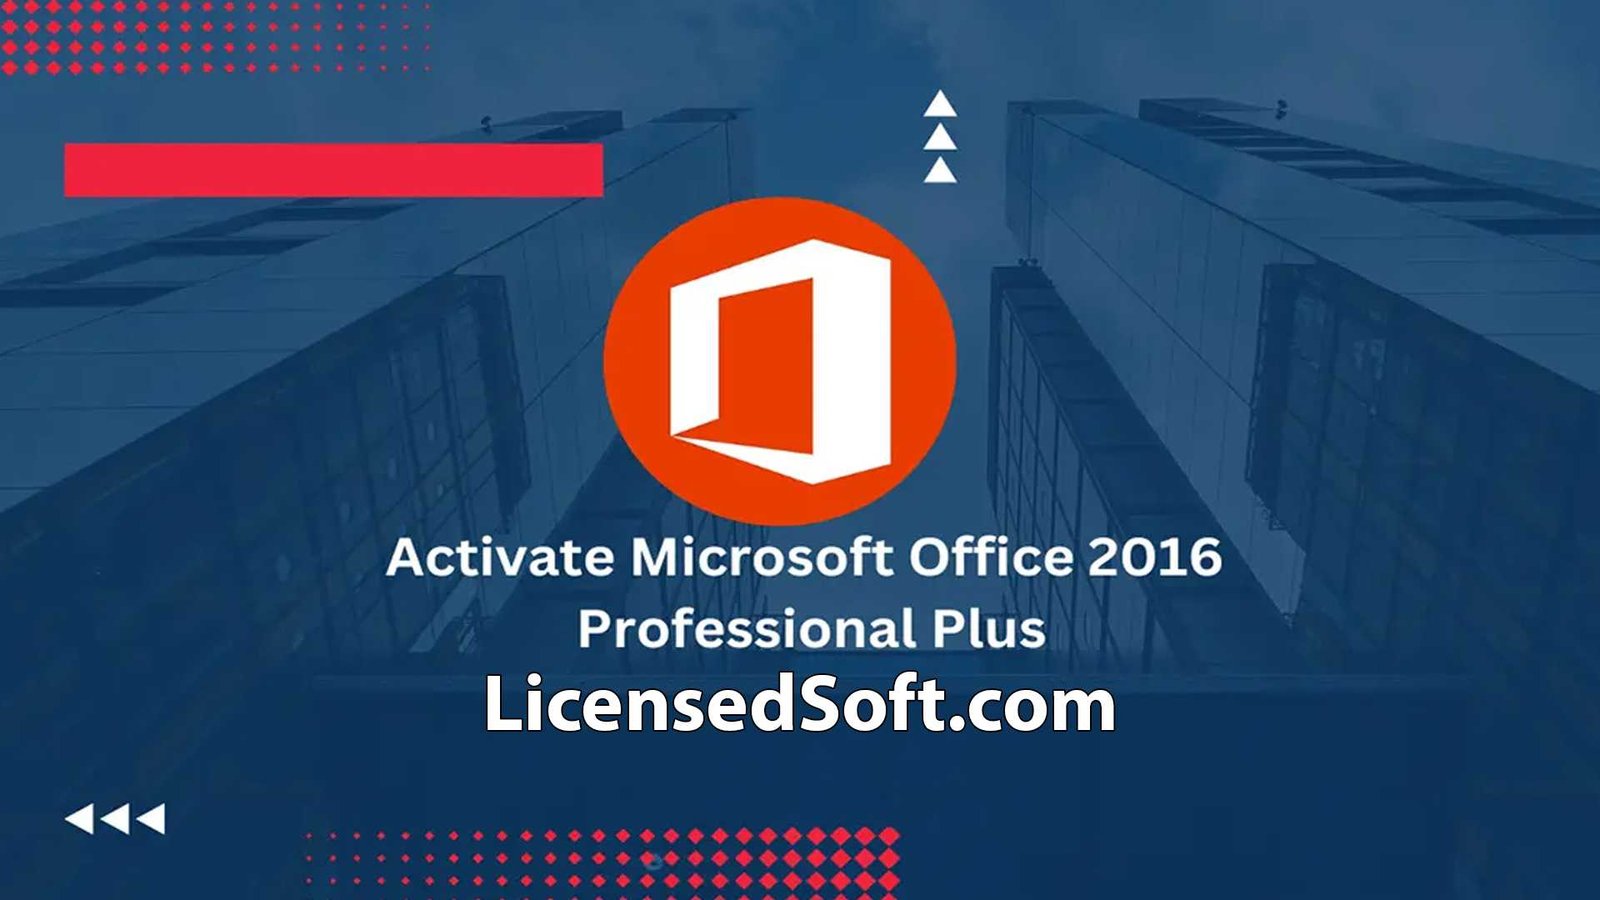 Microsoft Office 2016 Professional Plus Cover Image By LicensedSoft